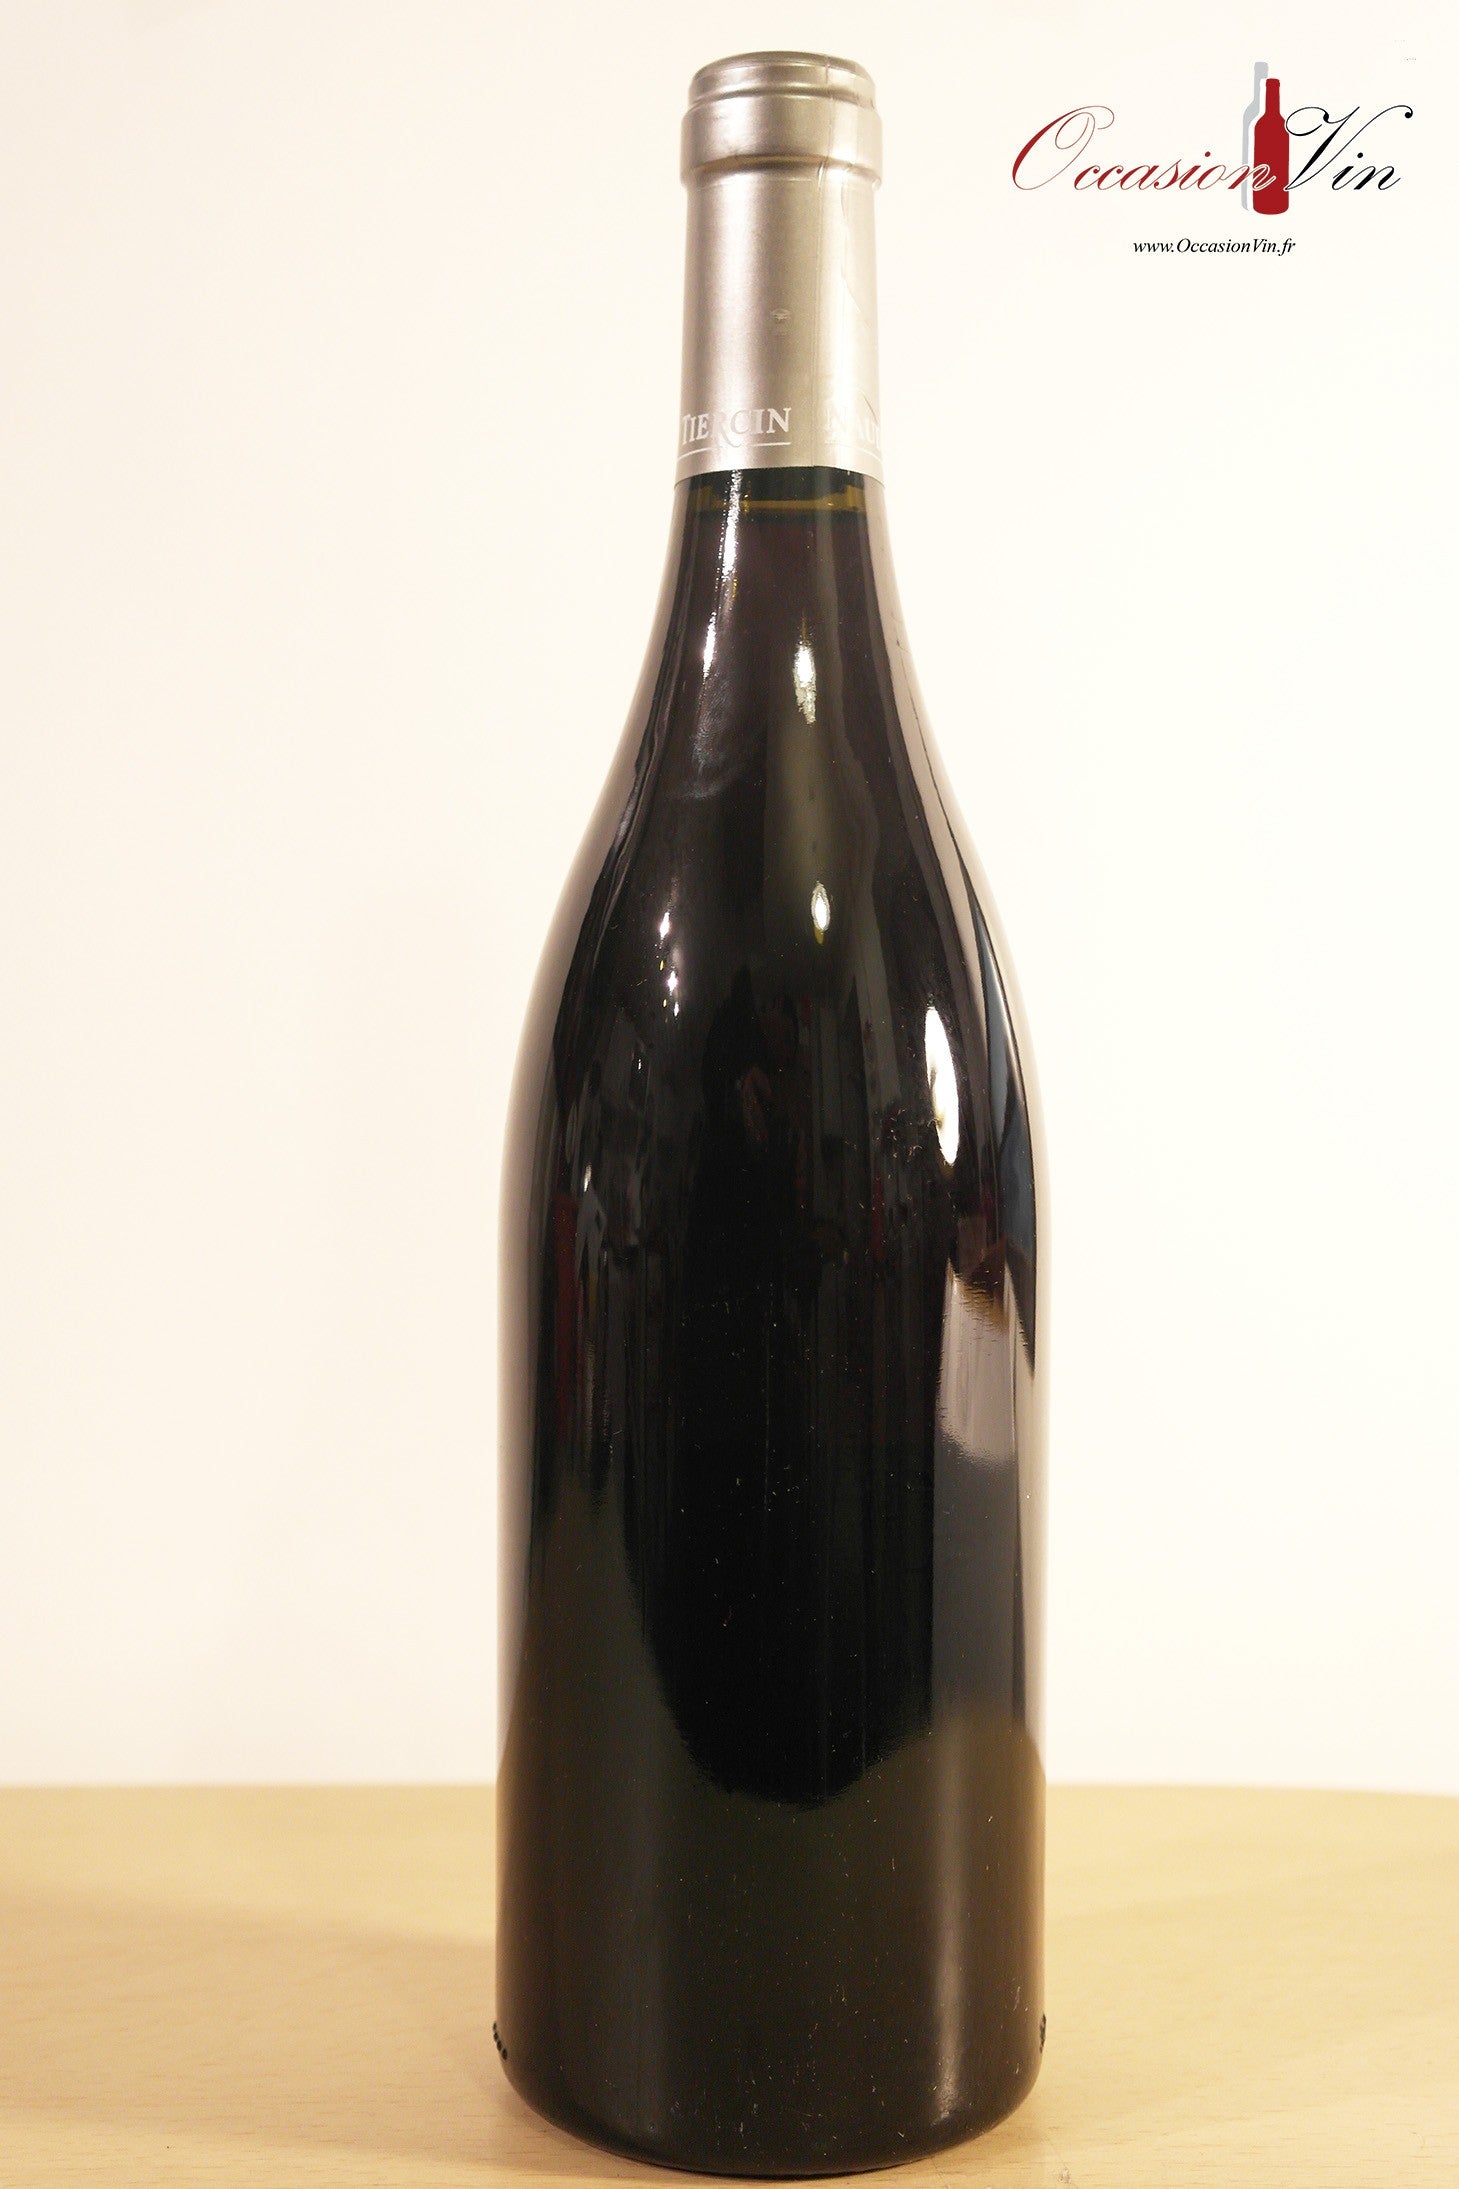 Domaine Taccard Vin 2007